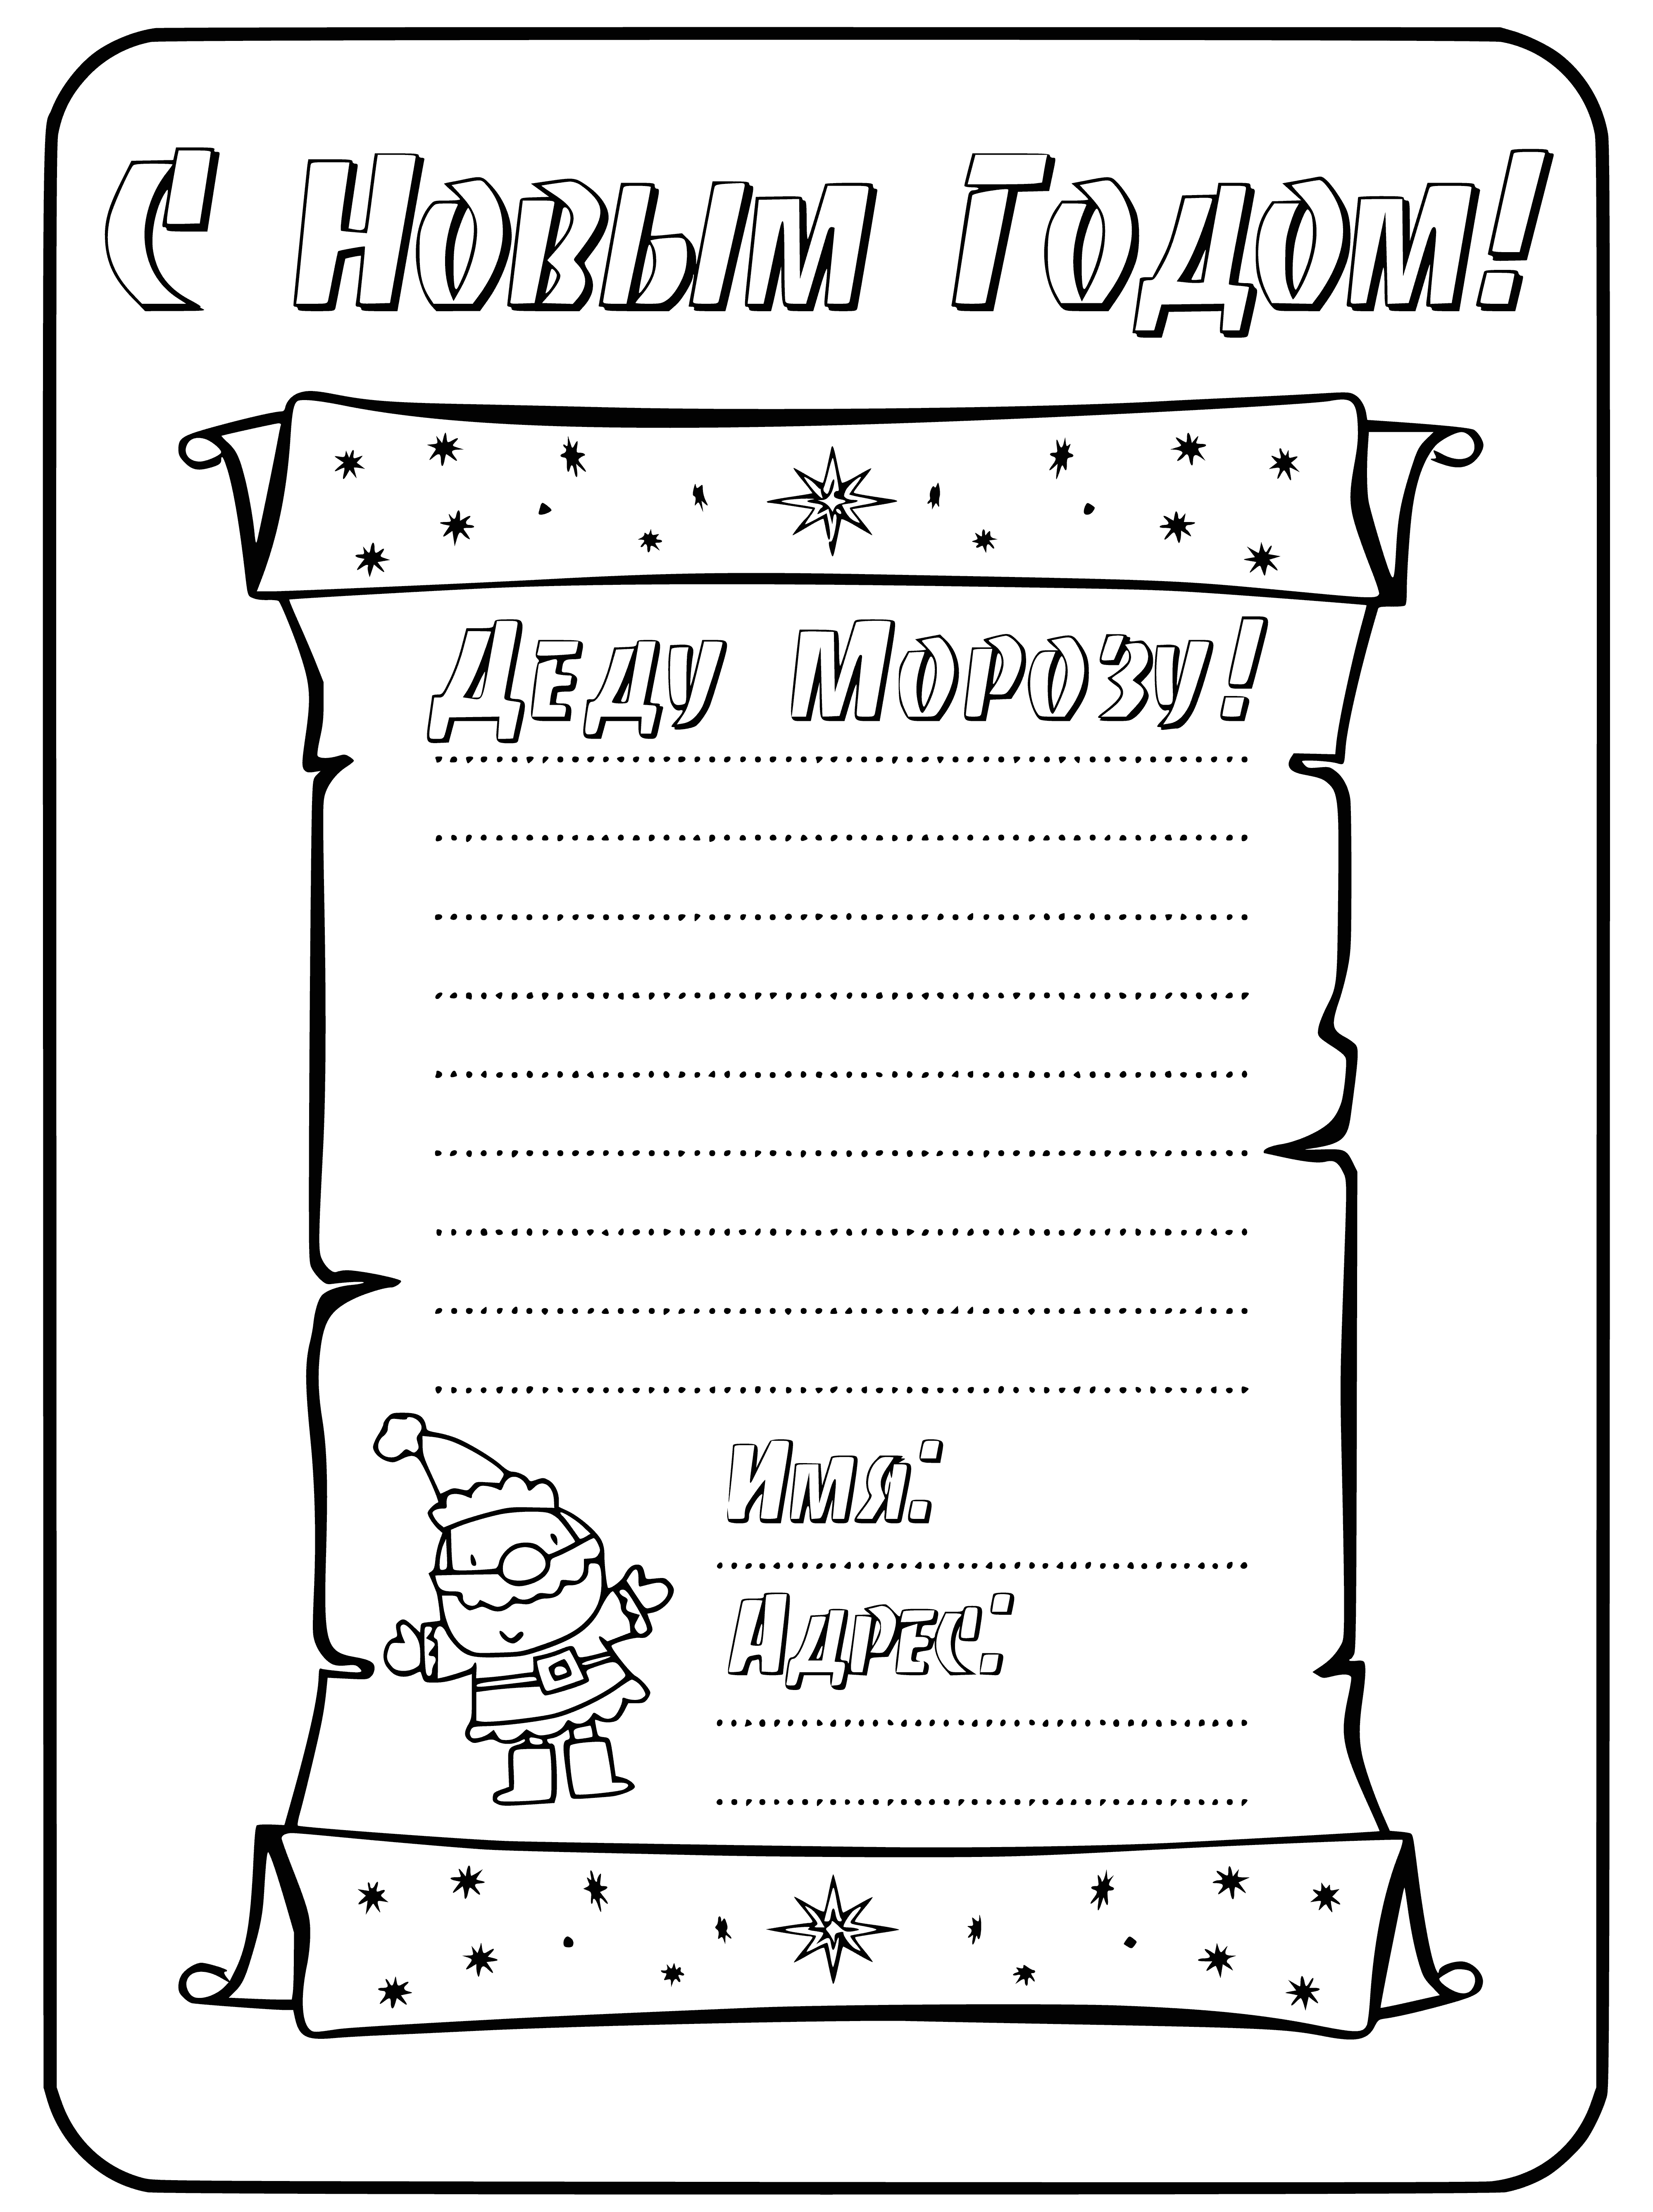 coloring page: Excited for Christmas! I've been good--hope you bring lots of presents! Wishing you a safe and happy trip delivering them on Christmas Eve. Love, Your friend.